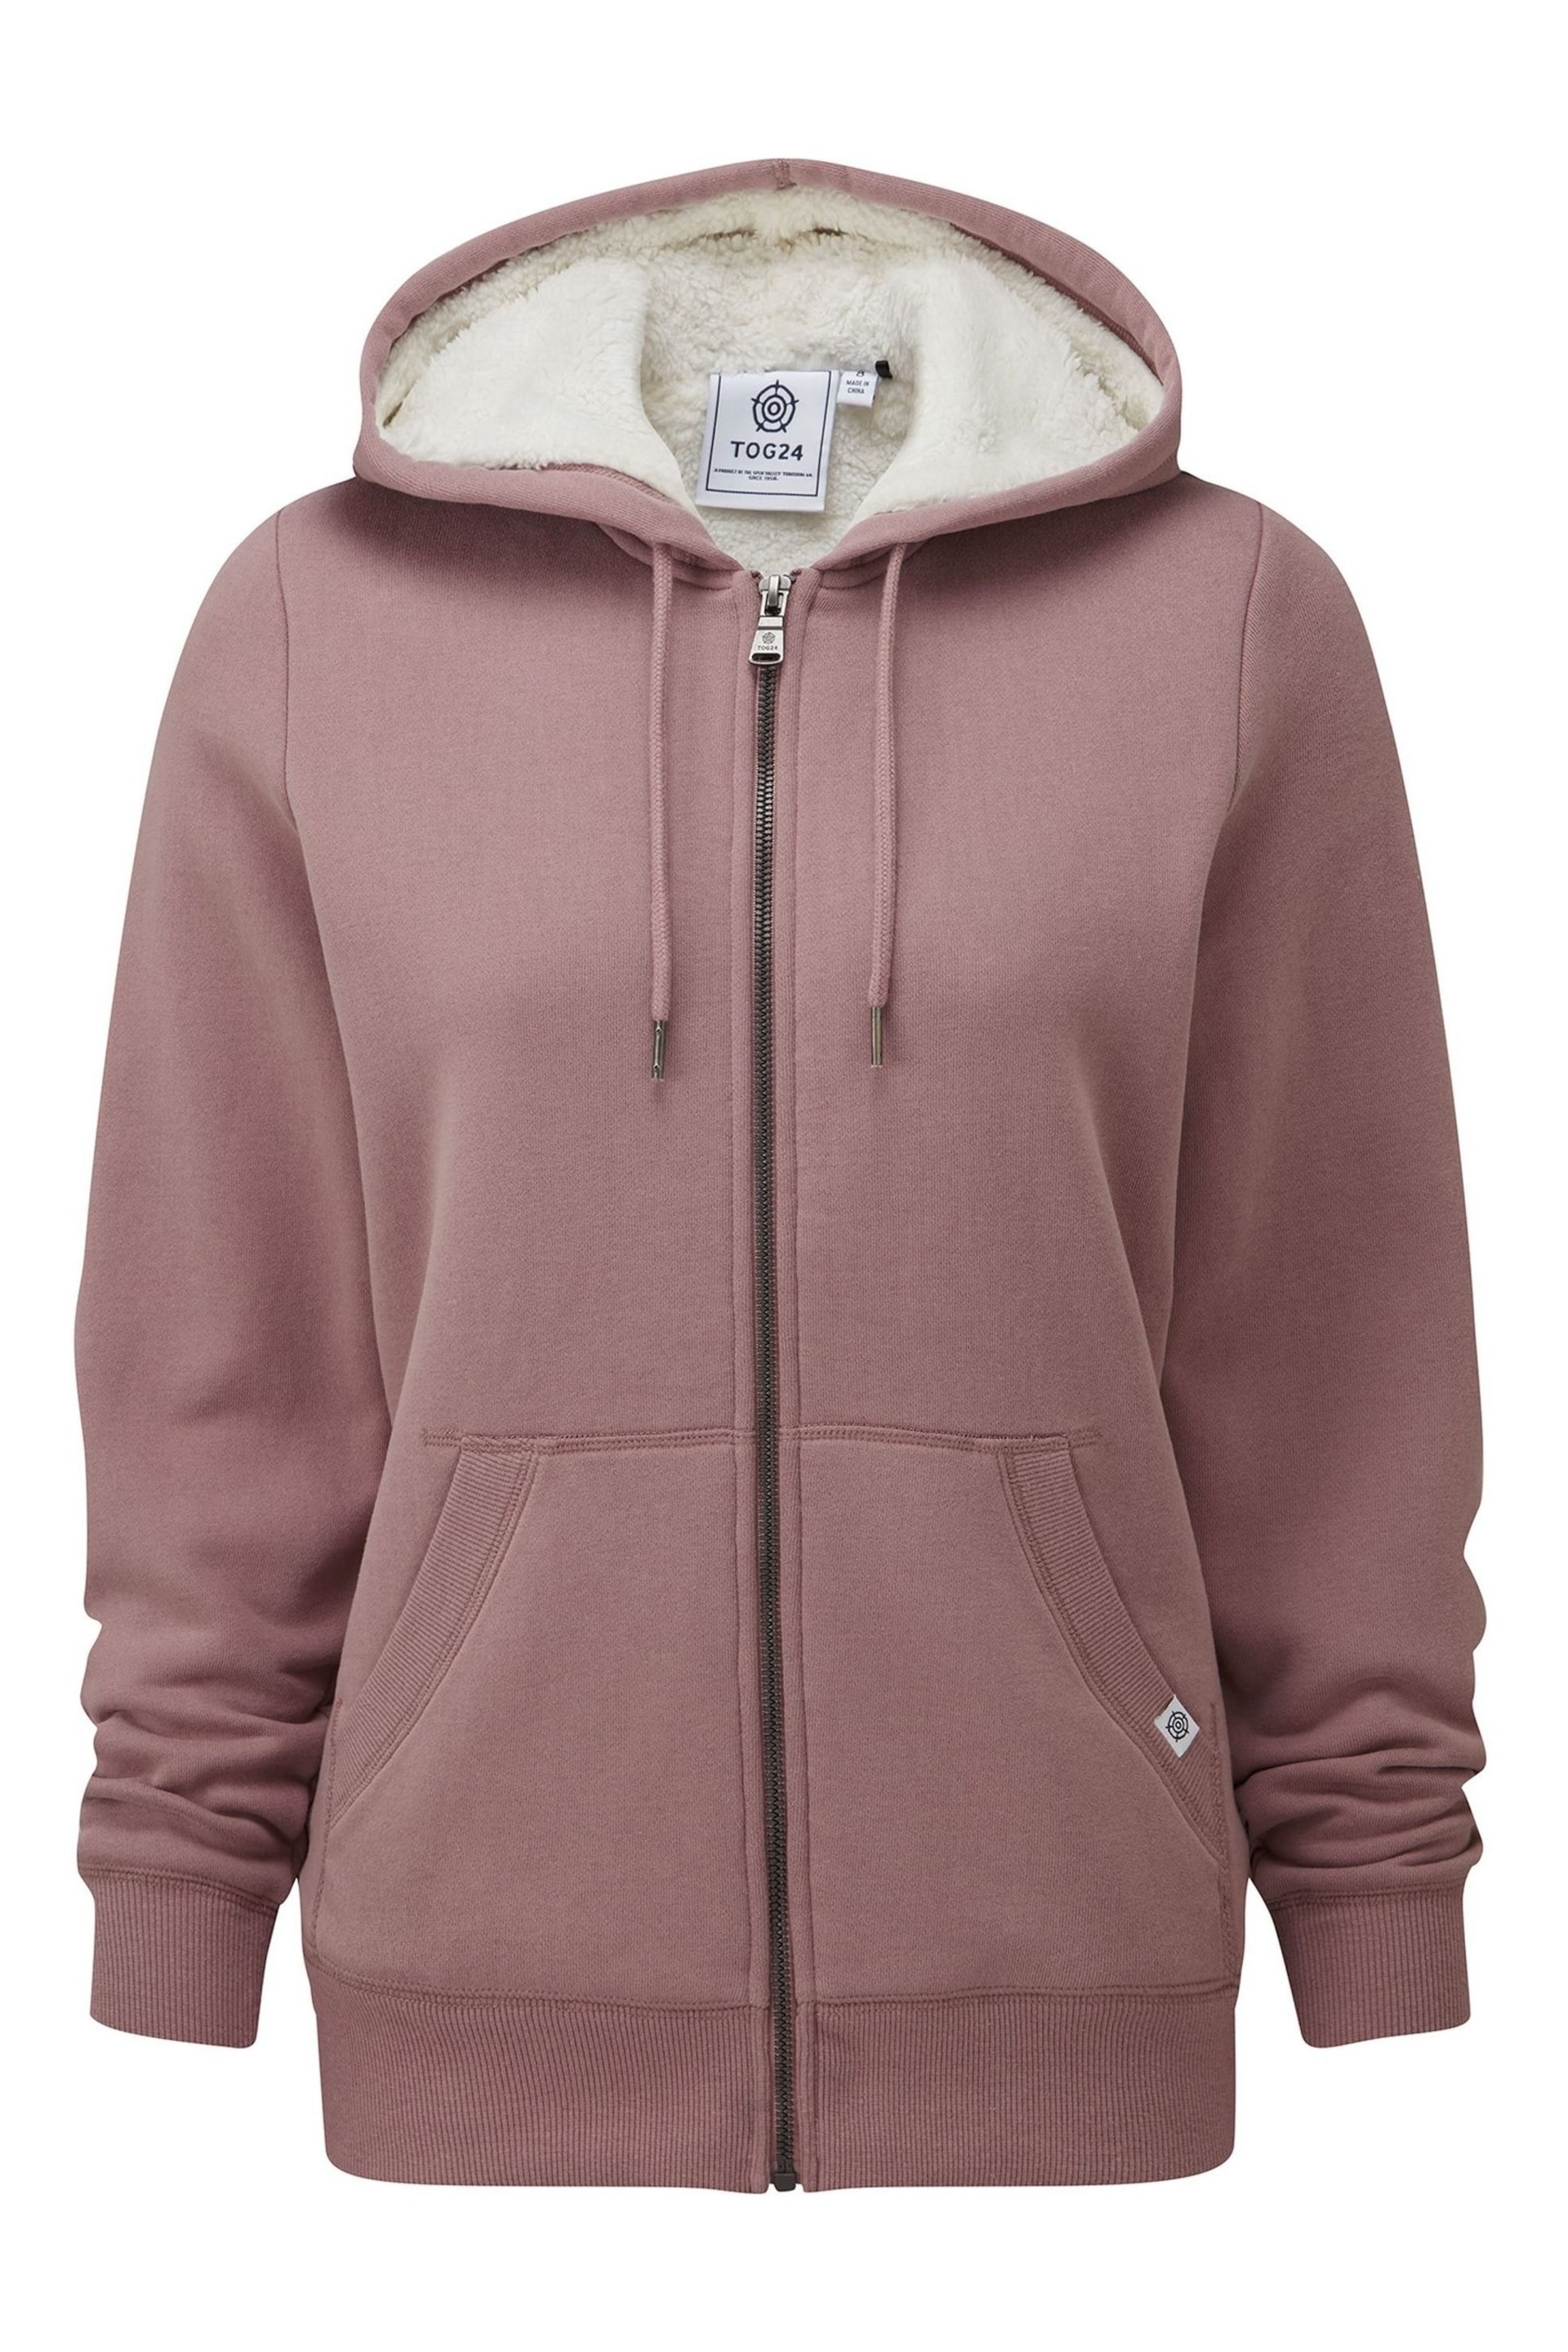 Tog 24 Pink Finch Sherpa Lined Hoodie - Image 5 of 6